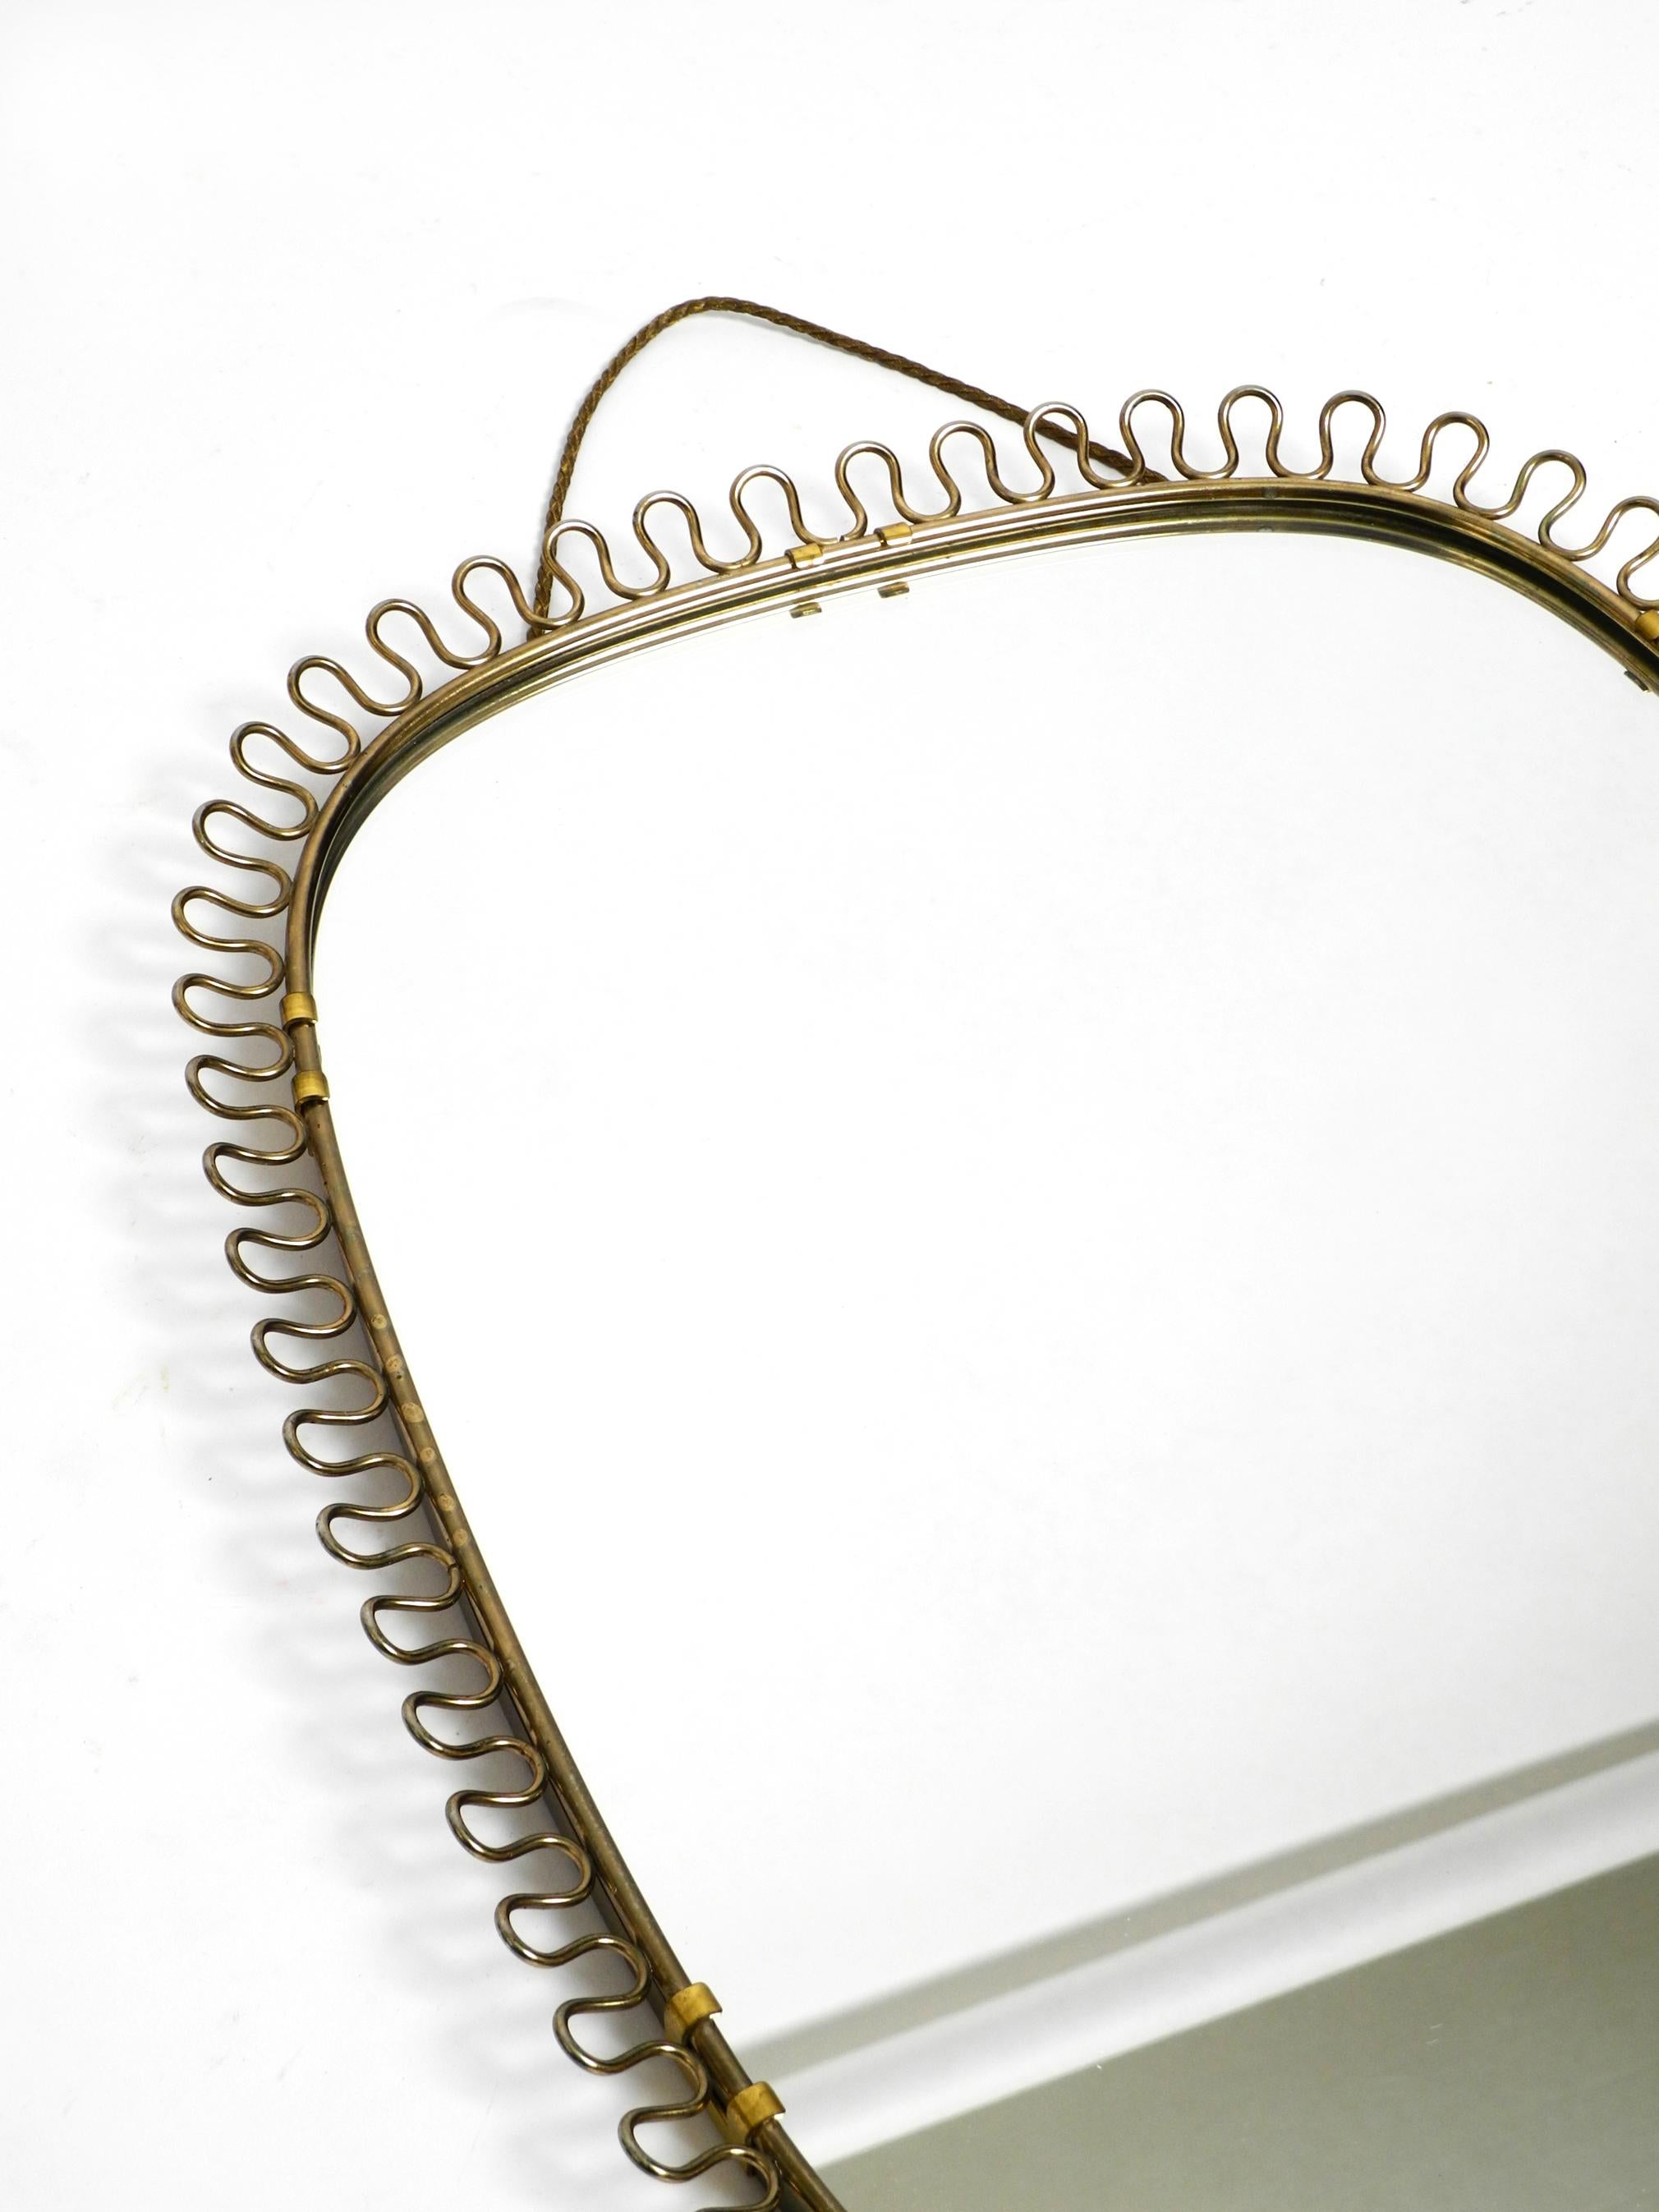 European Small, heavy Mid Century wall mirror with a frame with gold colored metal loops